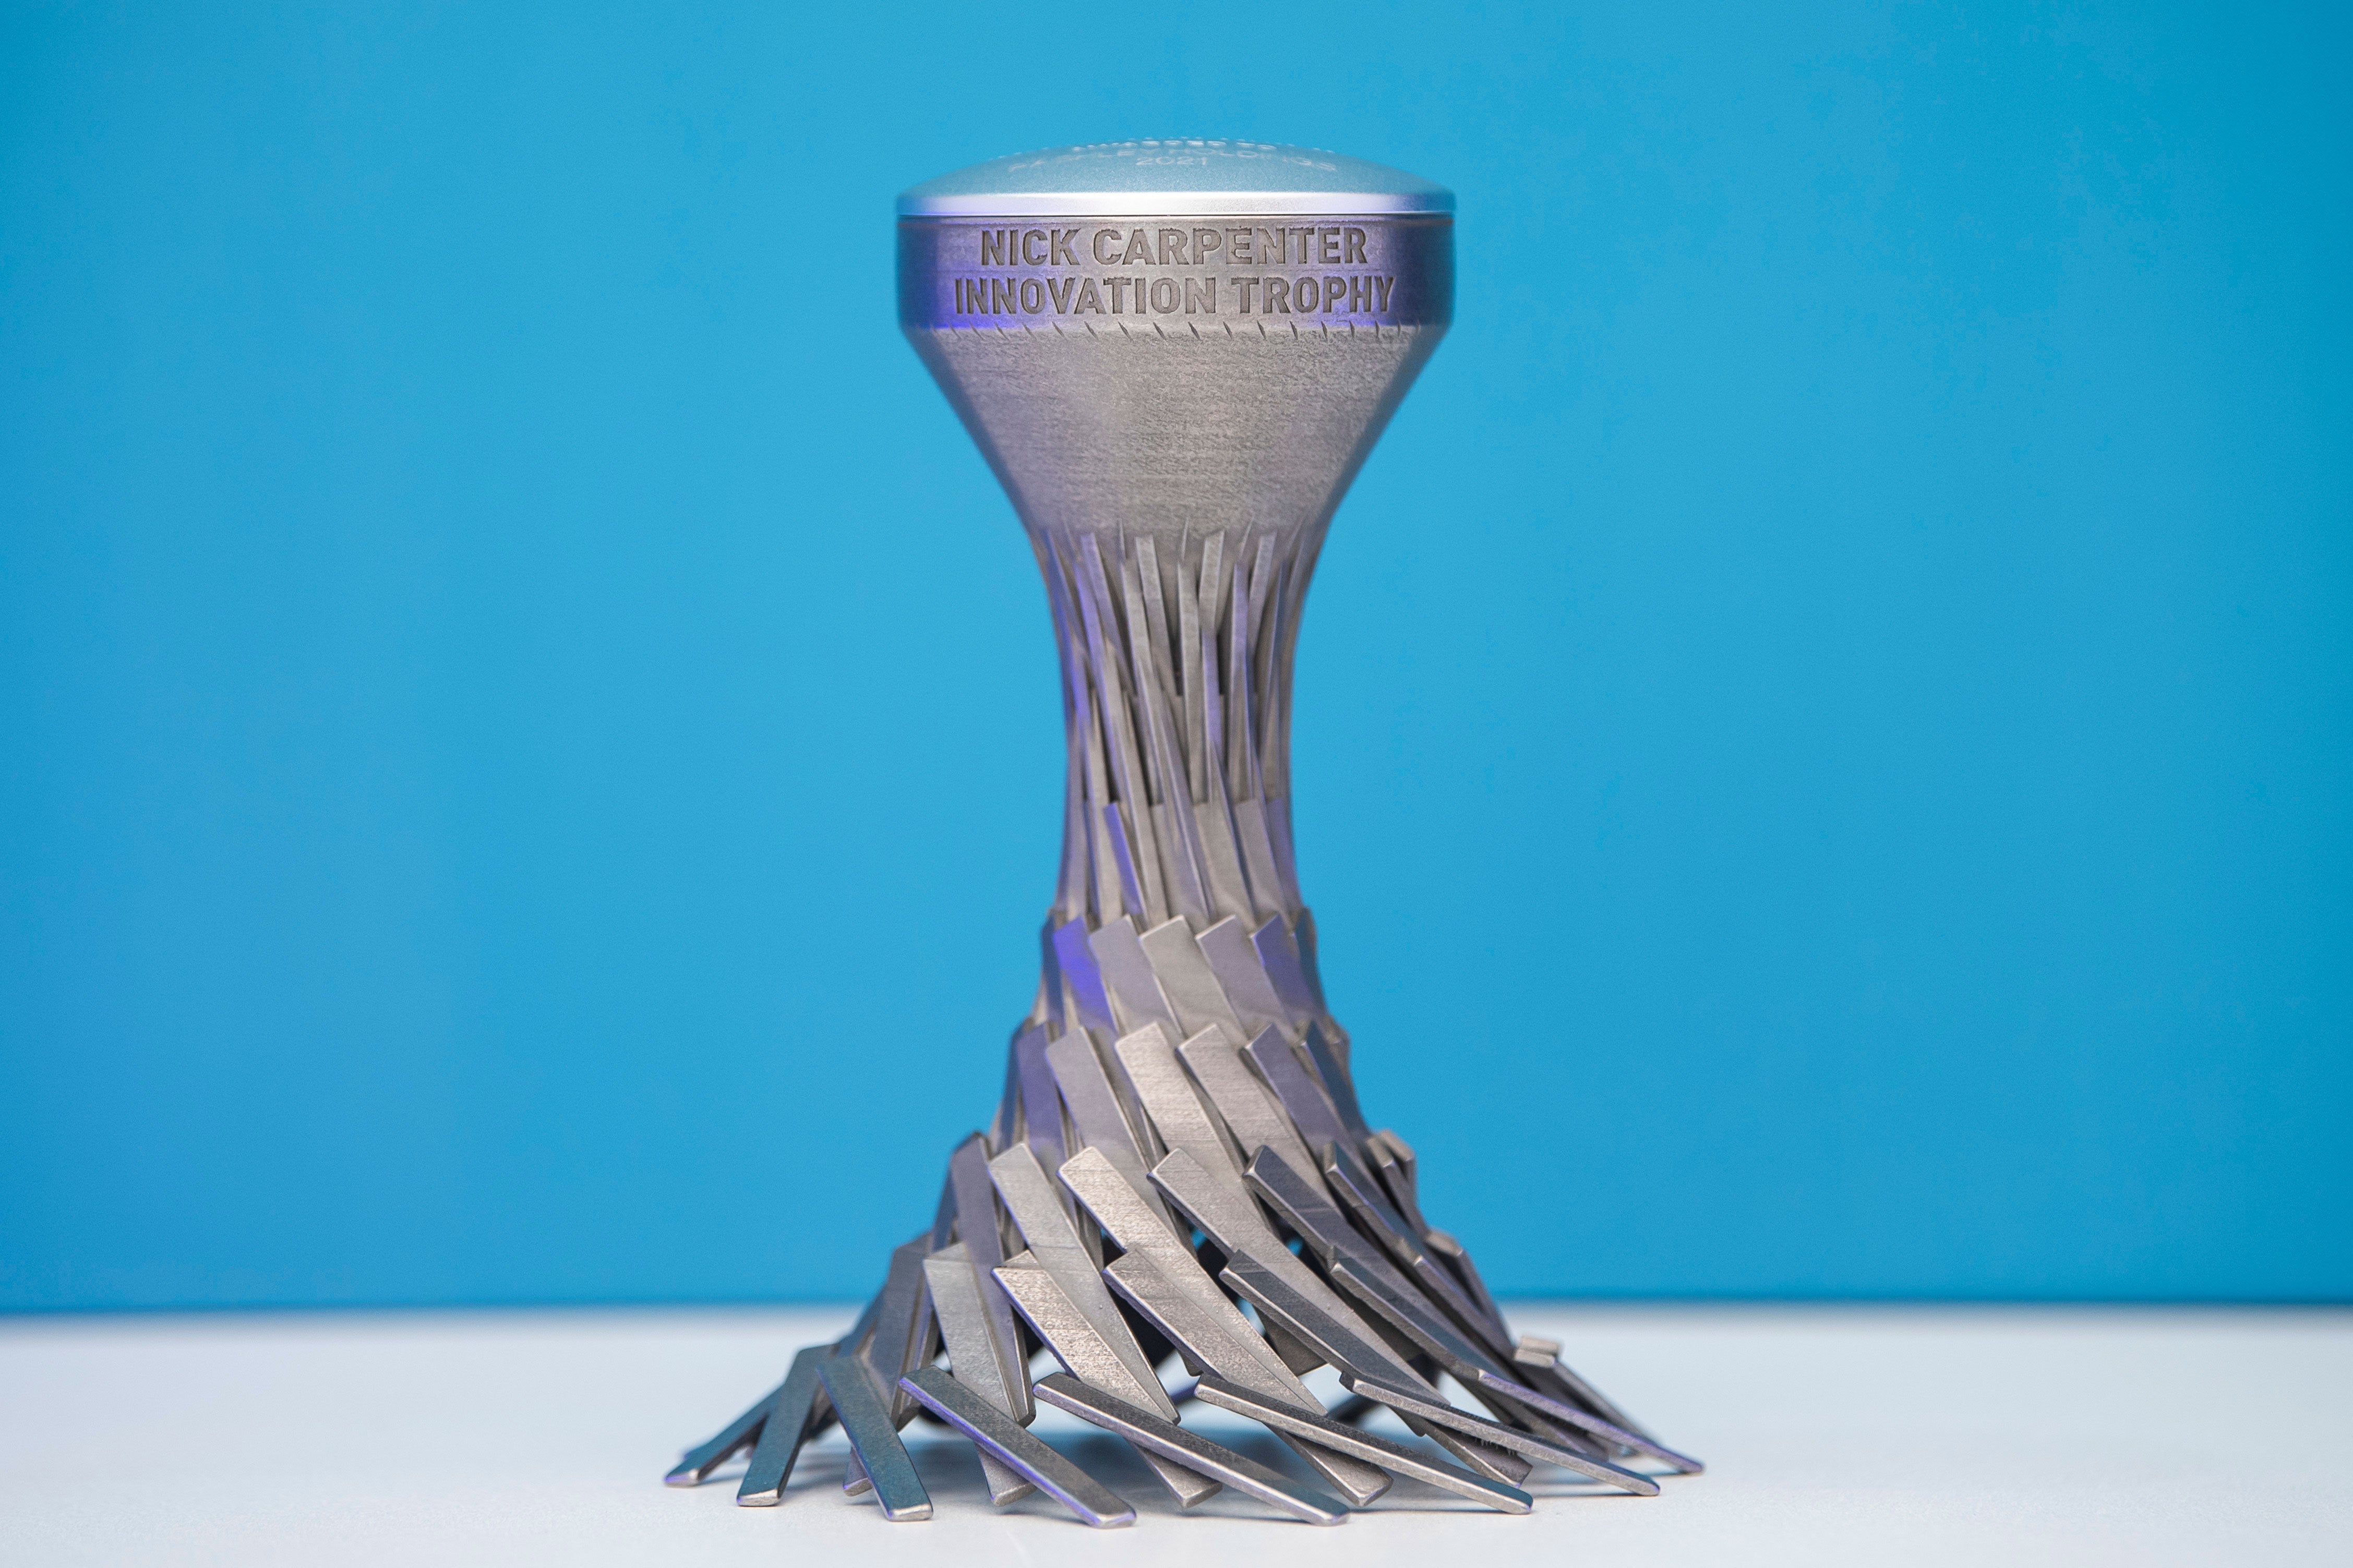 3D printed titanium trophy with sprialling base design, wider at the bottom and leading to a narrower top that is engraved.